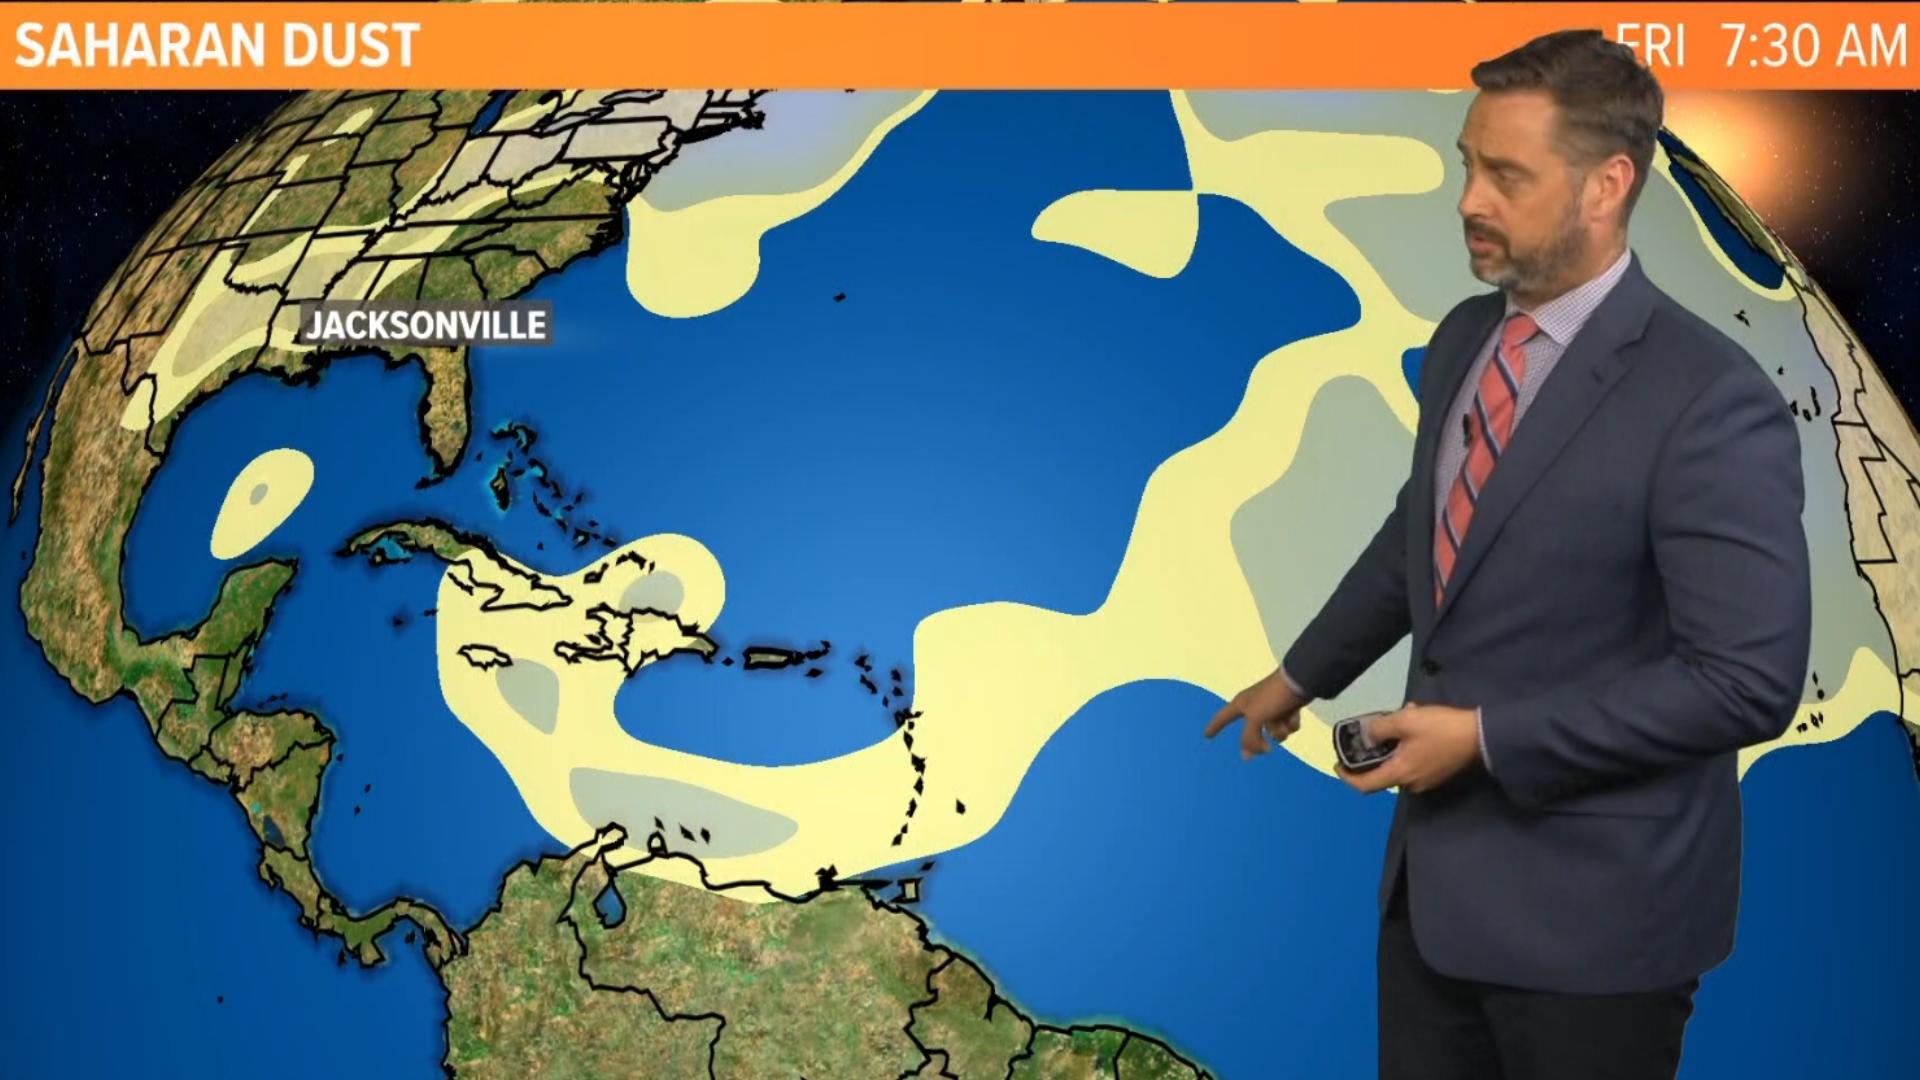 Saharan dust could possibly reach parts of Florida later this week, thus somewhat mitigating the development of hurricanes off the coast of Africa.